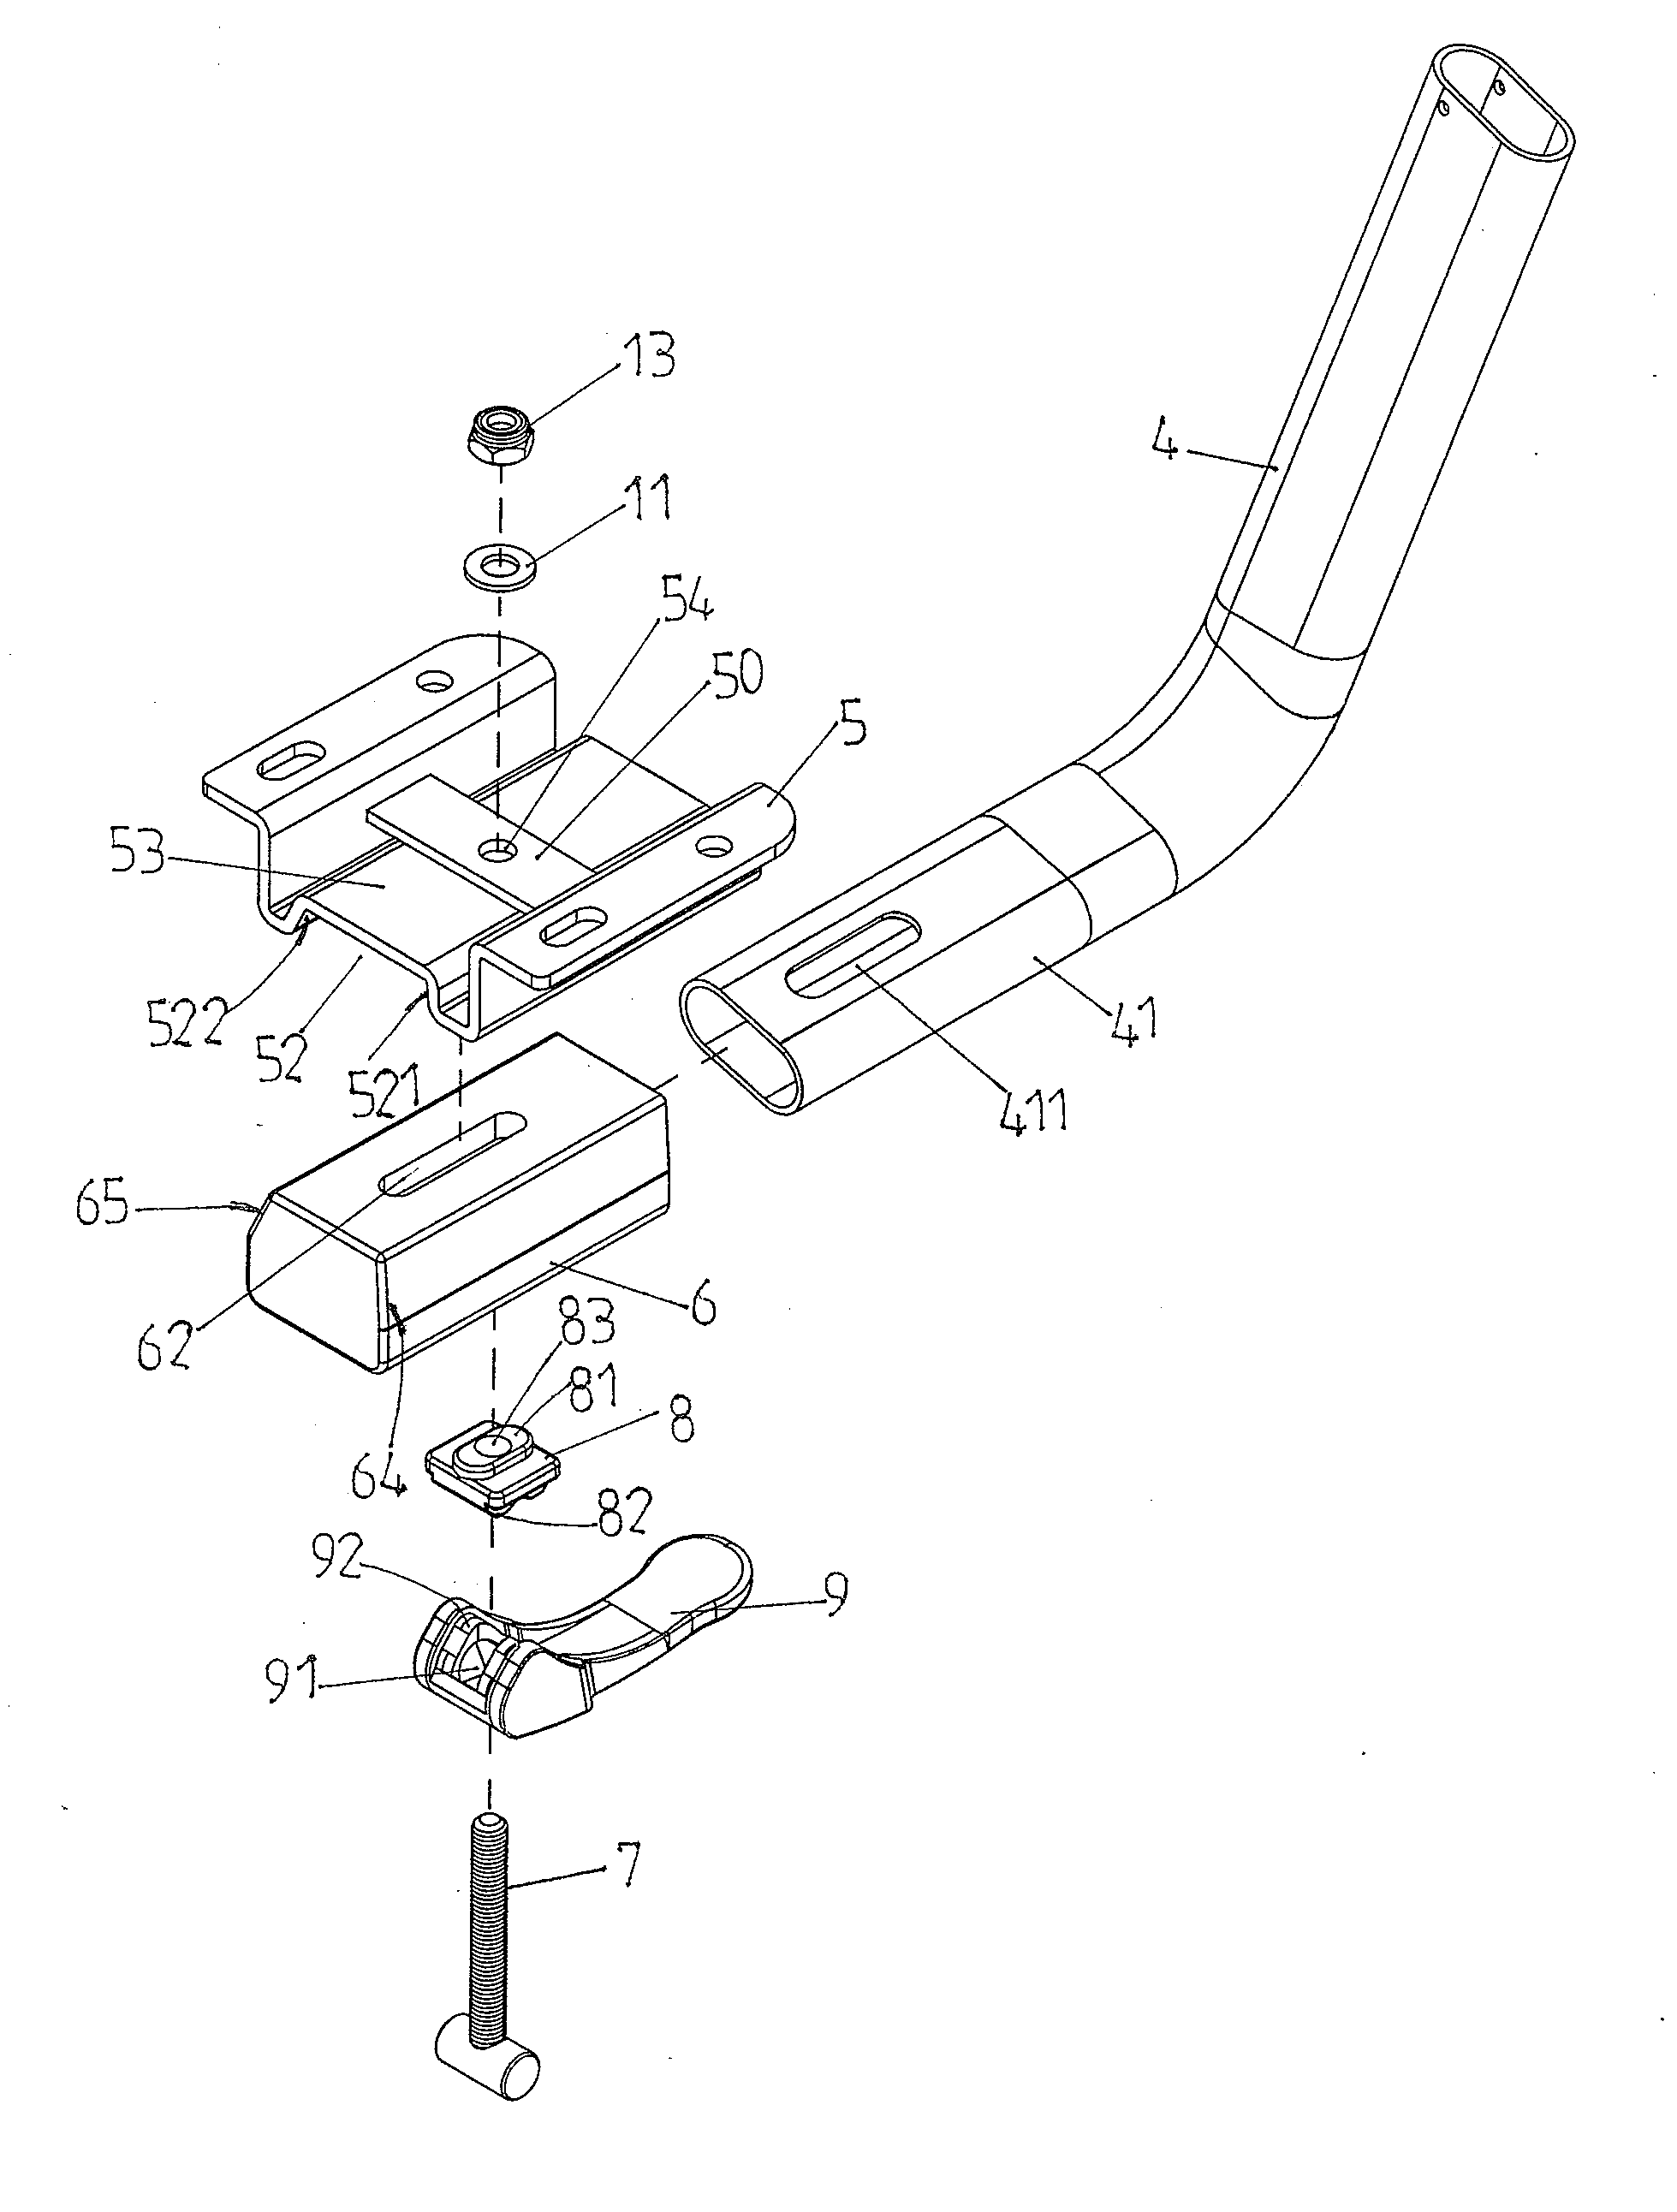 Armrest Assembly that can Adjust its Leftward and Rightward Positions